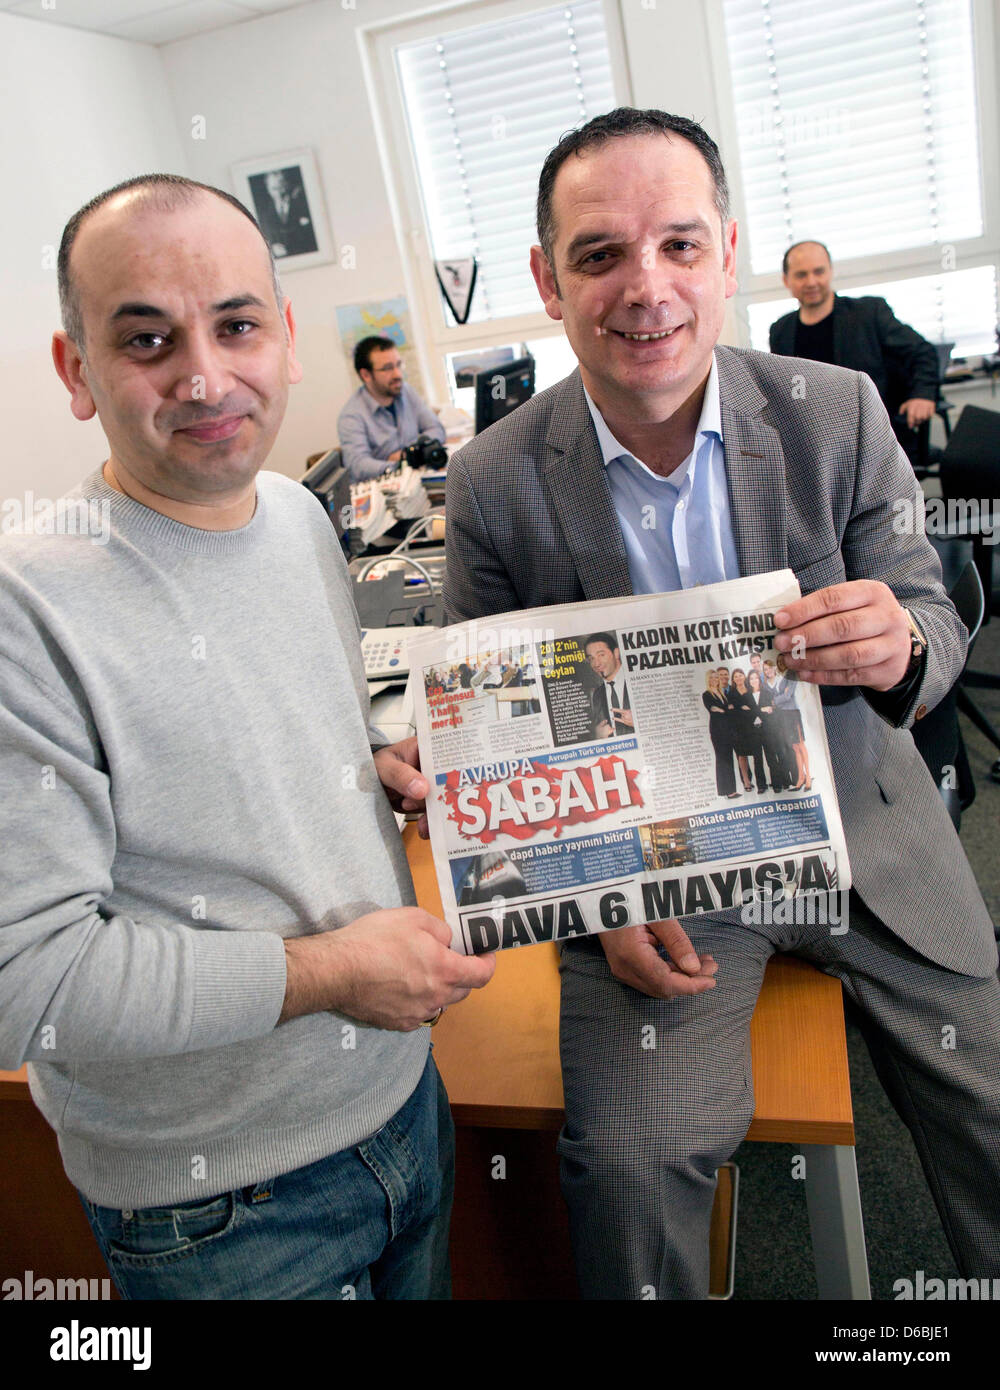 The vice chief editor Ismail Erel (L) and chief editor of Turkish newspaper 'Sabah' Mikdat Karaalioglu (R) sit in their office with this day's issure of their newspaper in Mörfelden-Walldorf, Germany, 16 April 2013. On the front page the postponing of the NSU trial to 6 May 2013 is covered. 'Sabah' had laid a constitutional complaint against distribution of the journalist's spots. Photo: FRANK RUMPENHORST Stock Photo